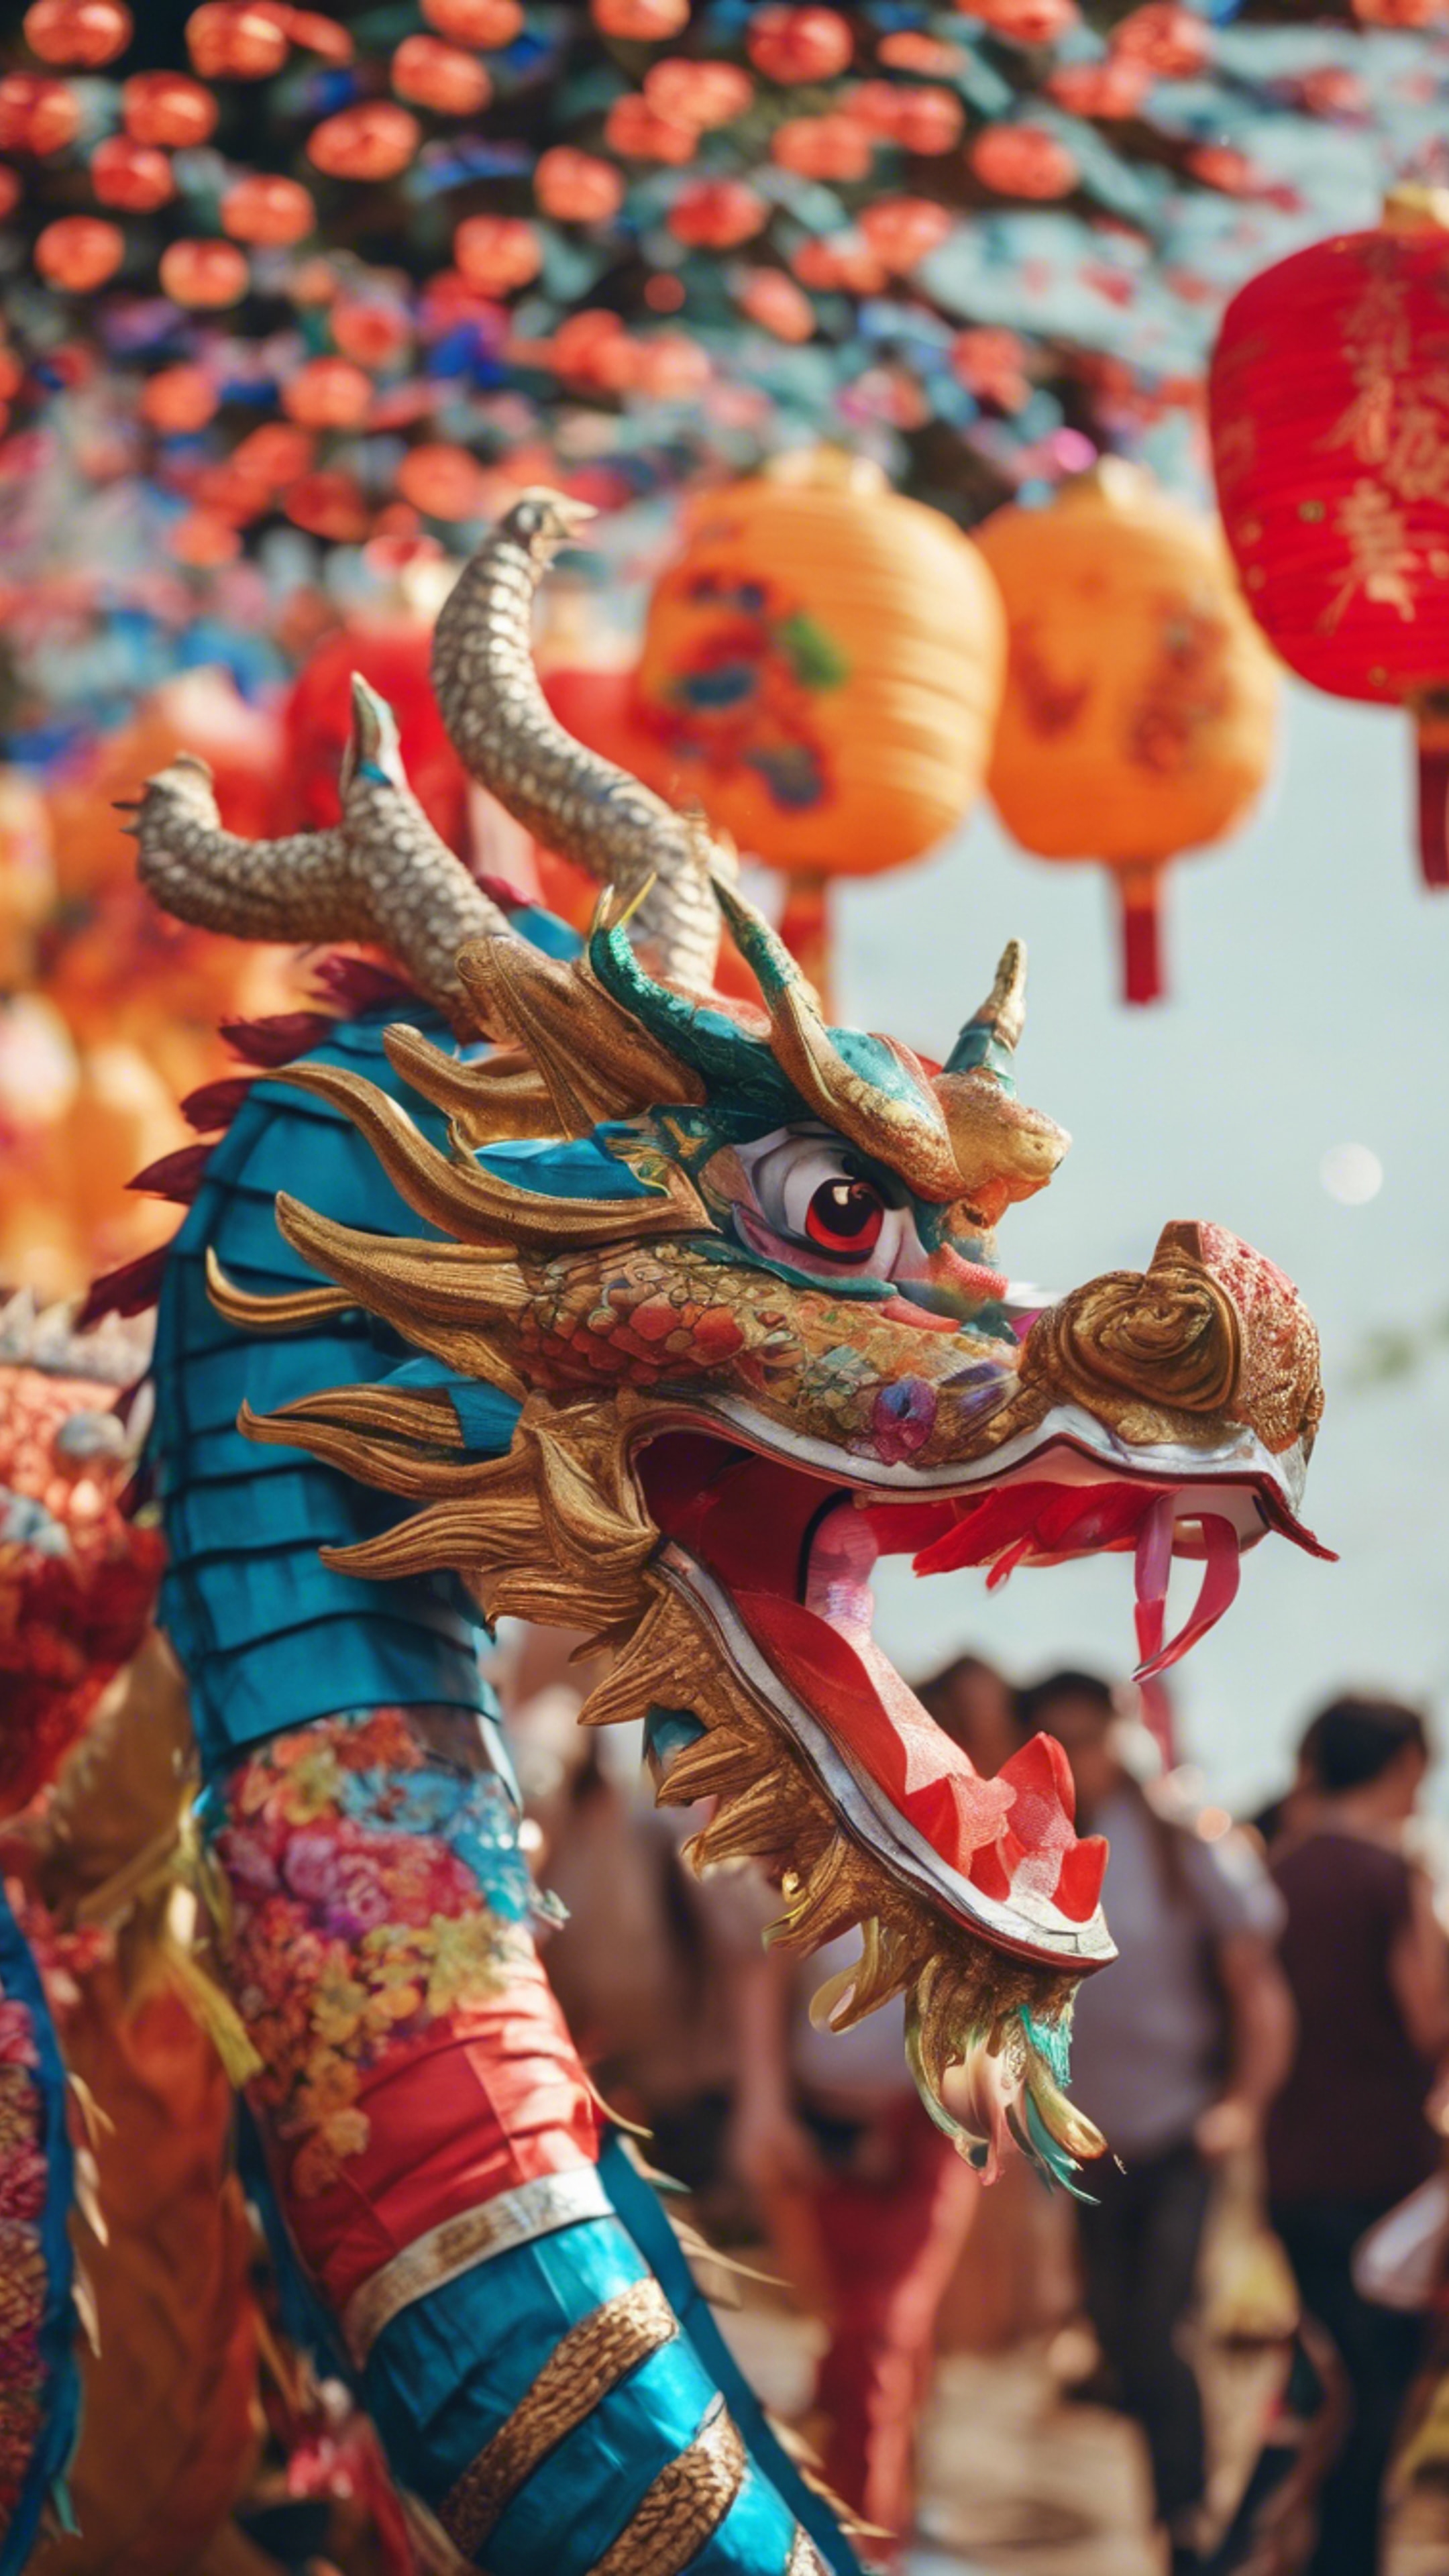 An oriental-style dragon parading amidst a colorful festival with paper lanterns. Tapet[5877da5b29174274b3e8]